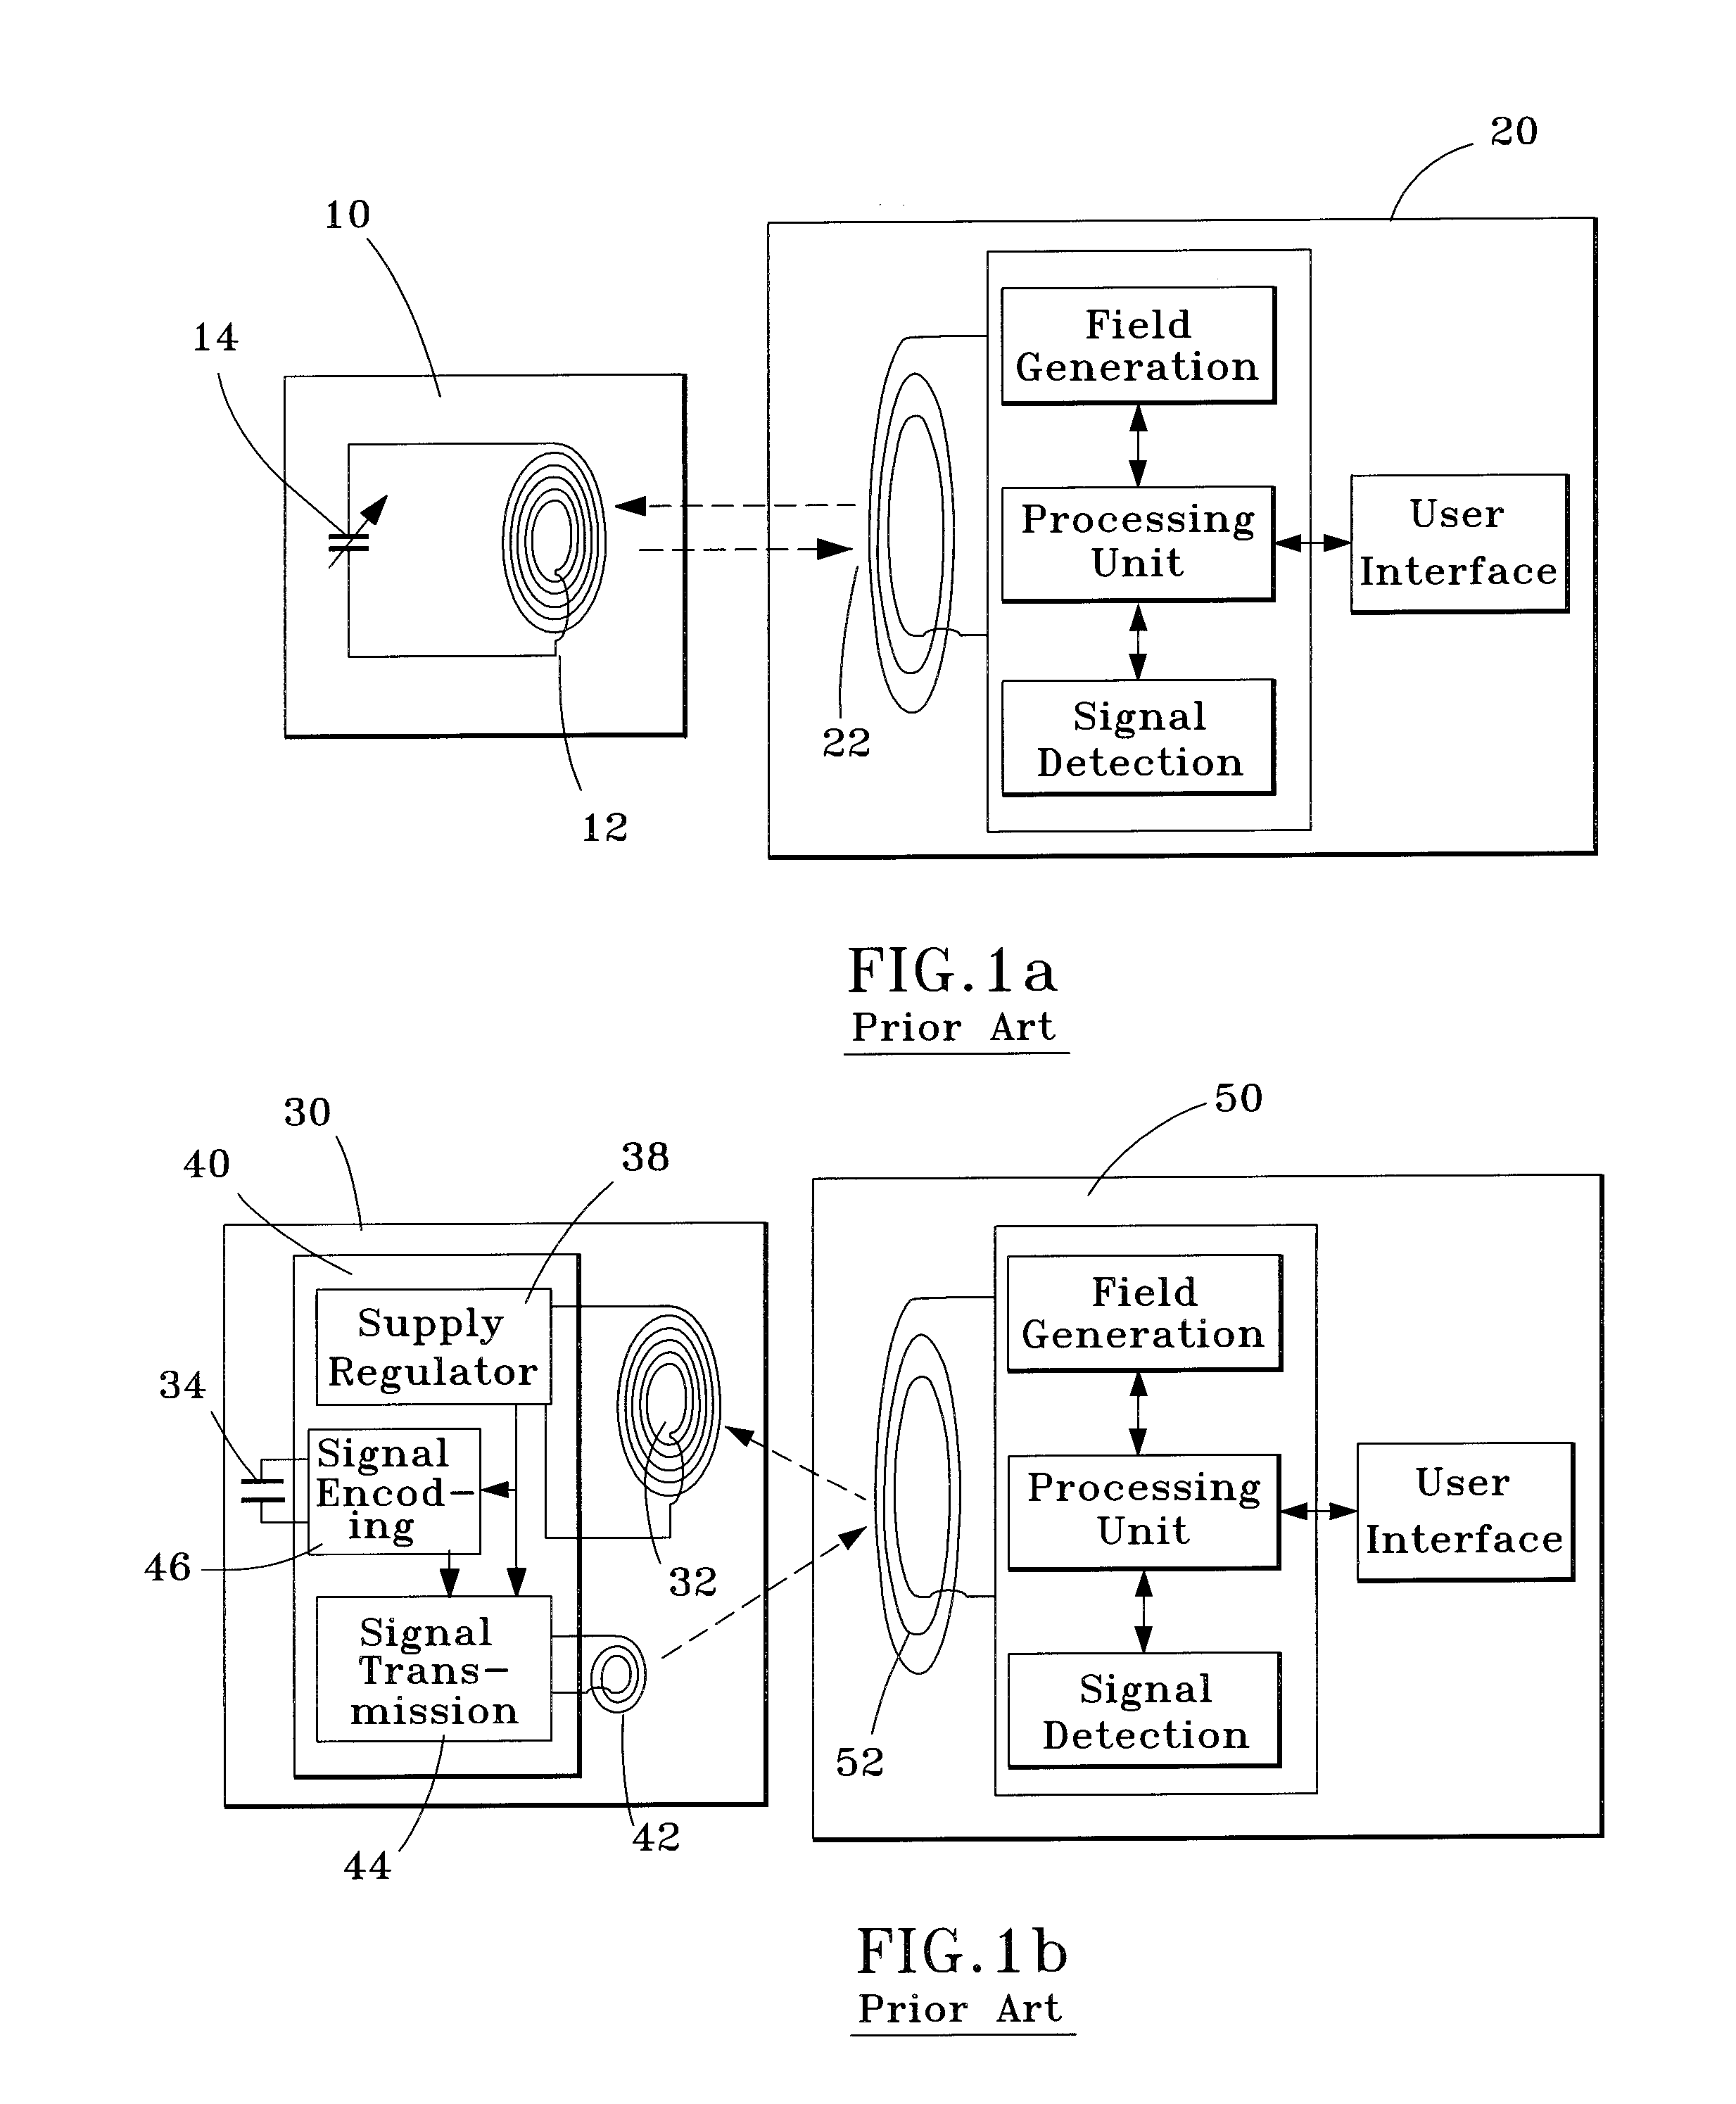 Procedure and system for monitoring a physiological parameter within an internal organ of a living body